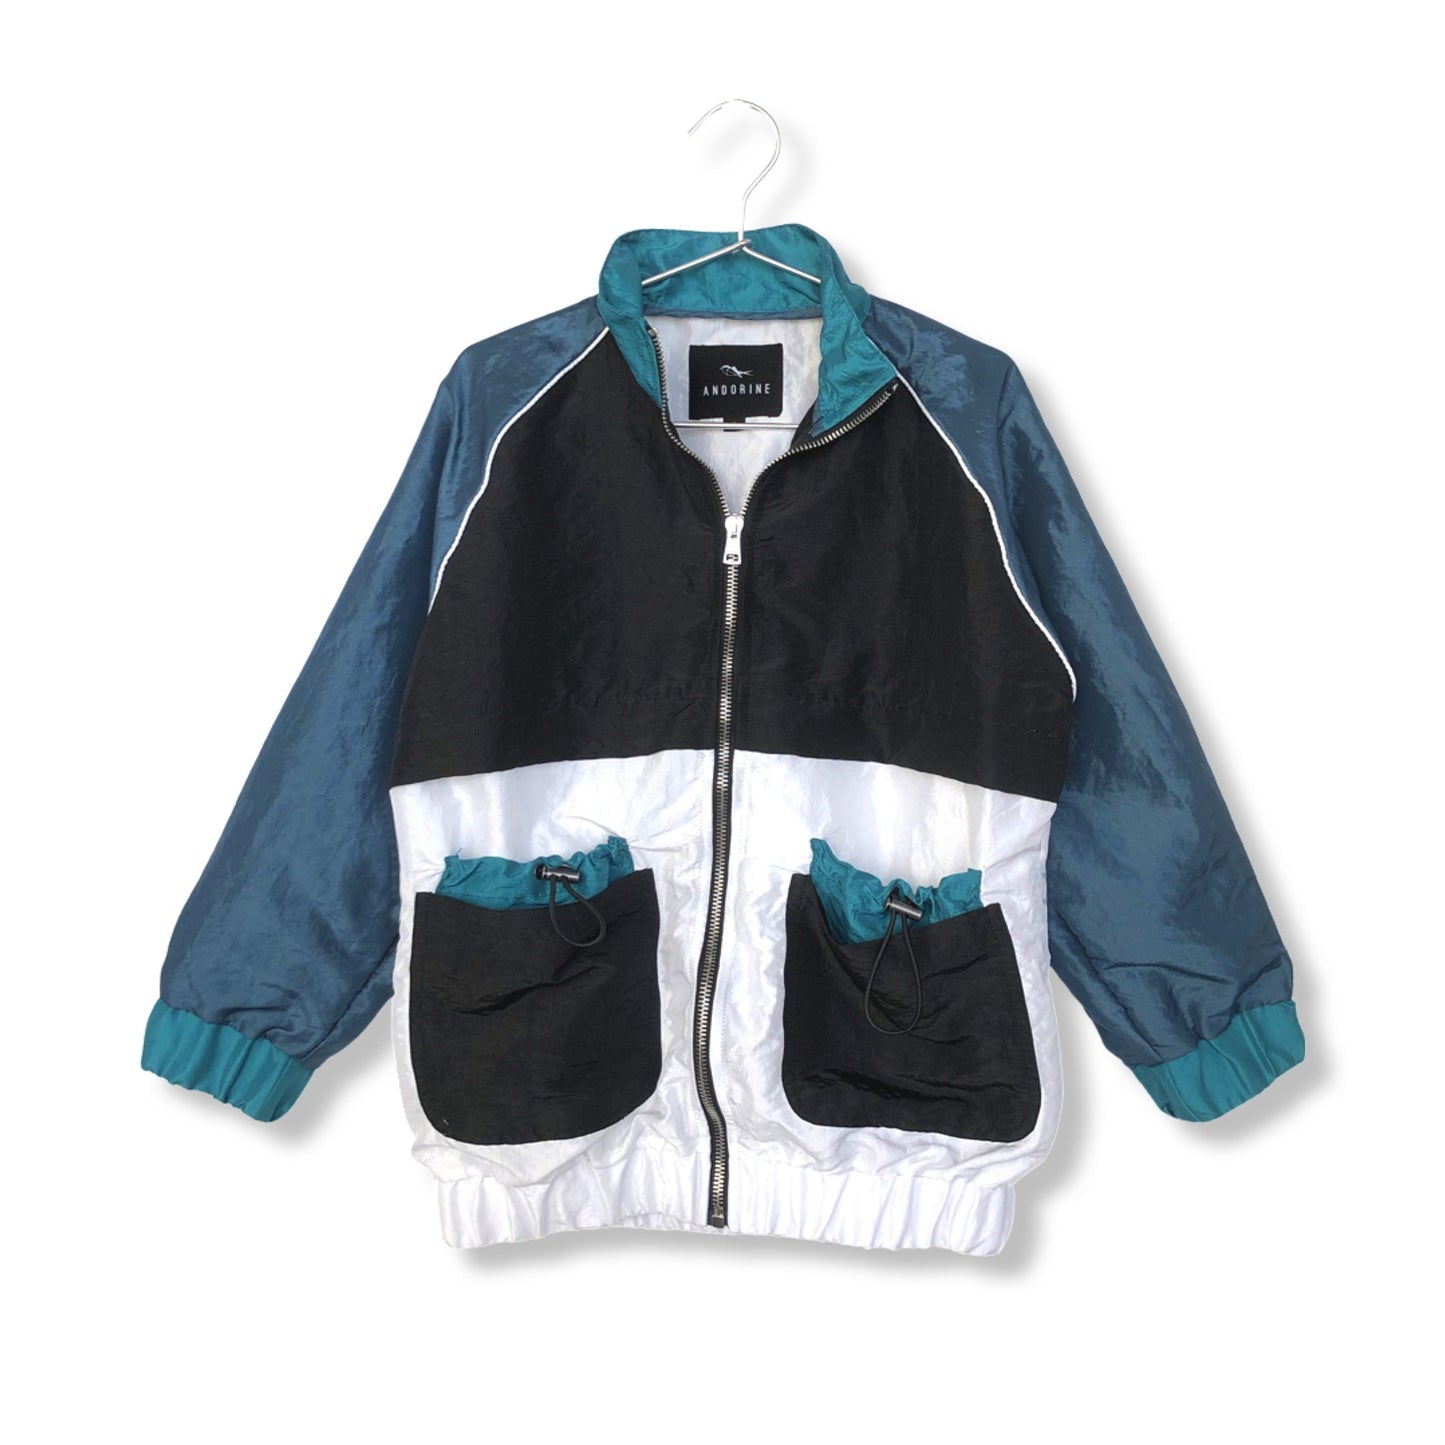 BLUE AND WHITE COLORBLOCK JACKET